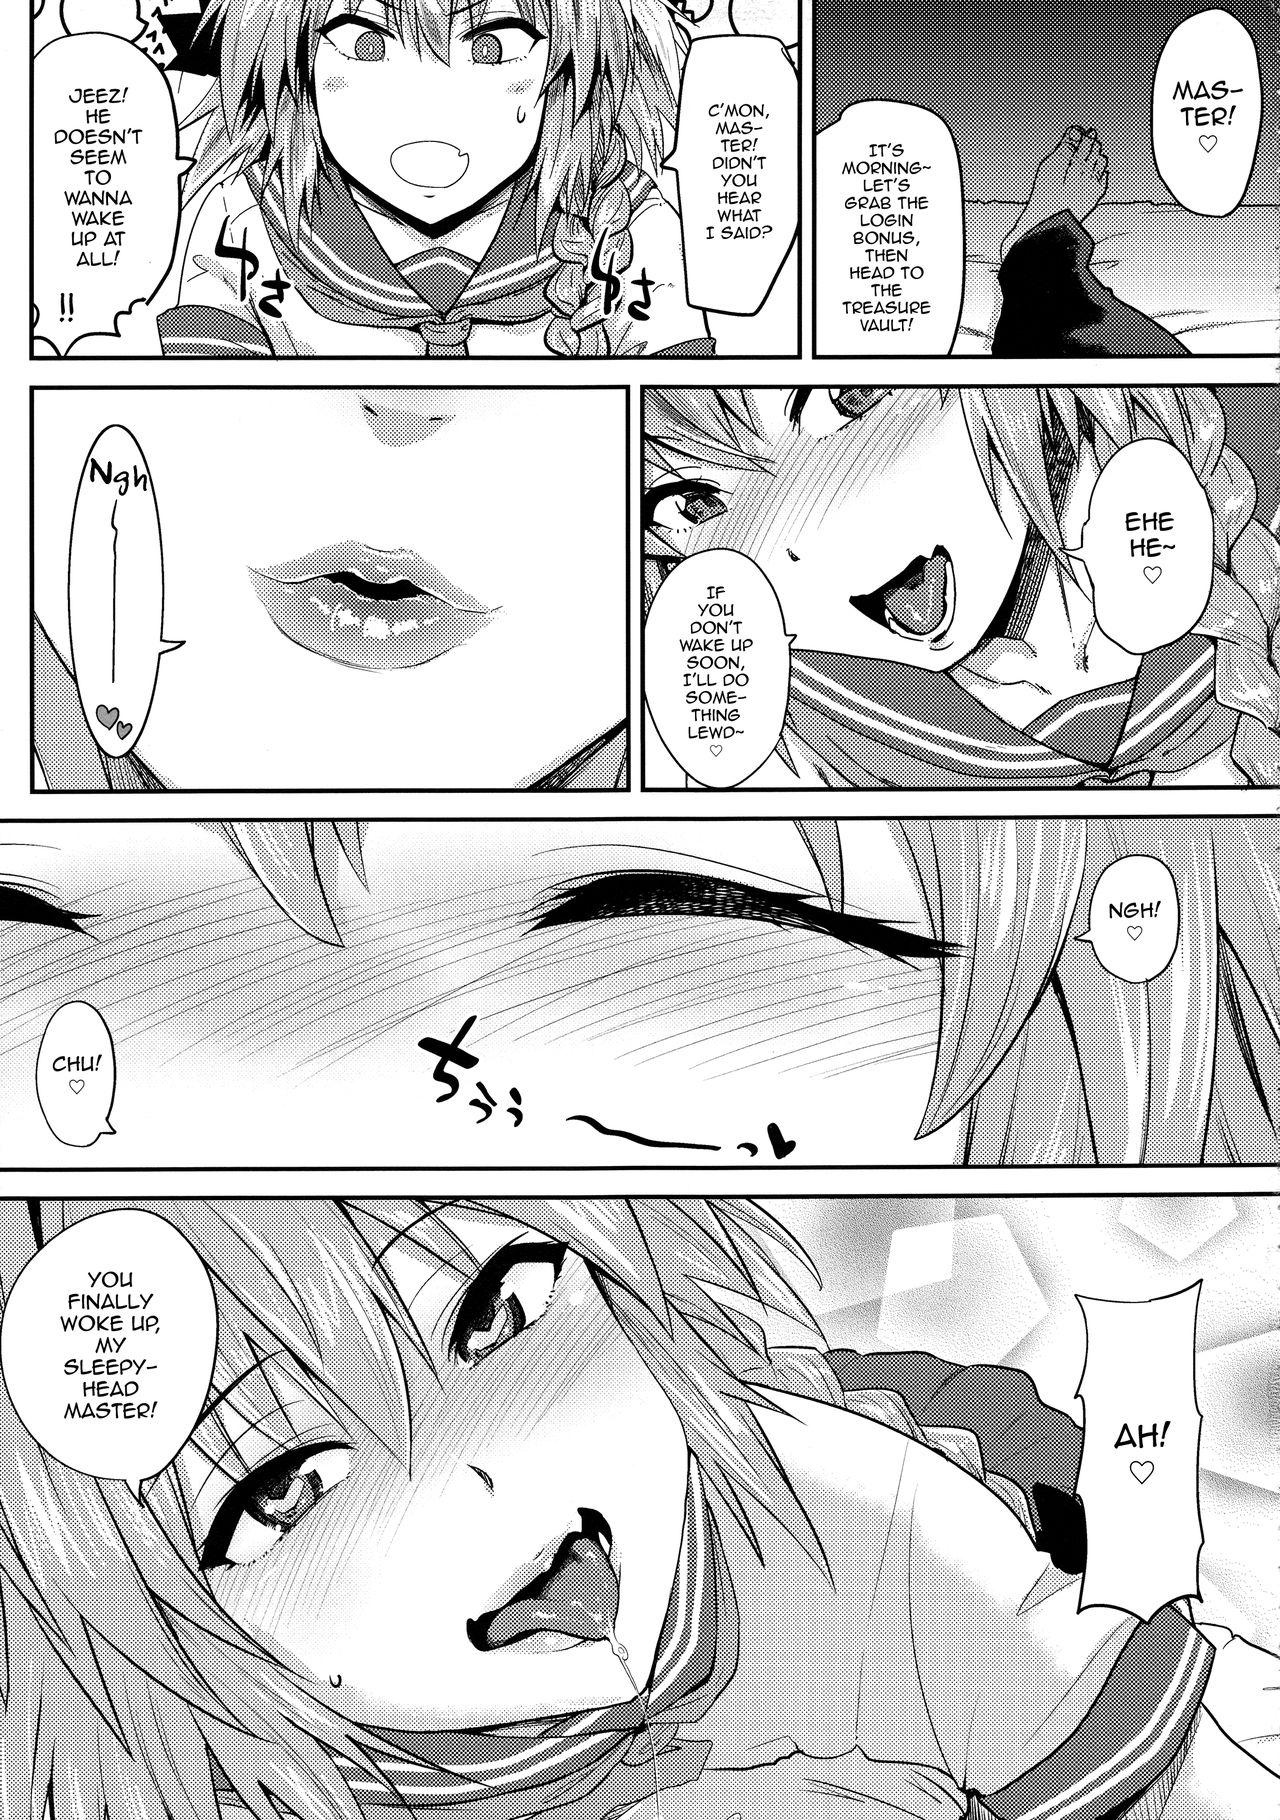 Pussyfucking VR Astolfo - Fate grand order Pov Sex - Page 5